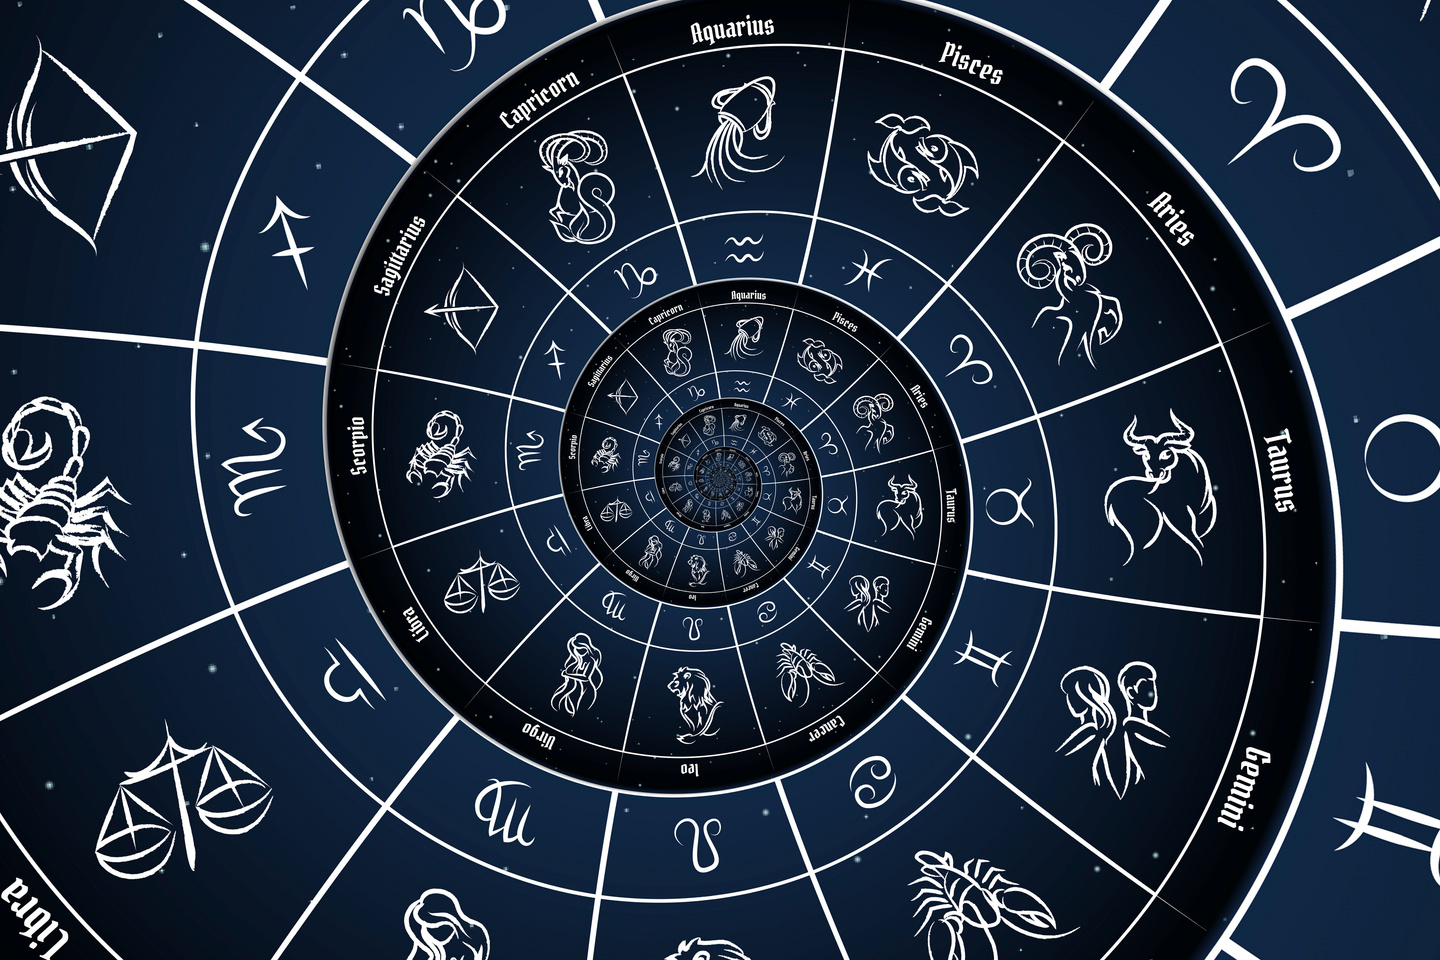 Astrological Background with Zodiac Signs and Symbol.